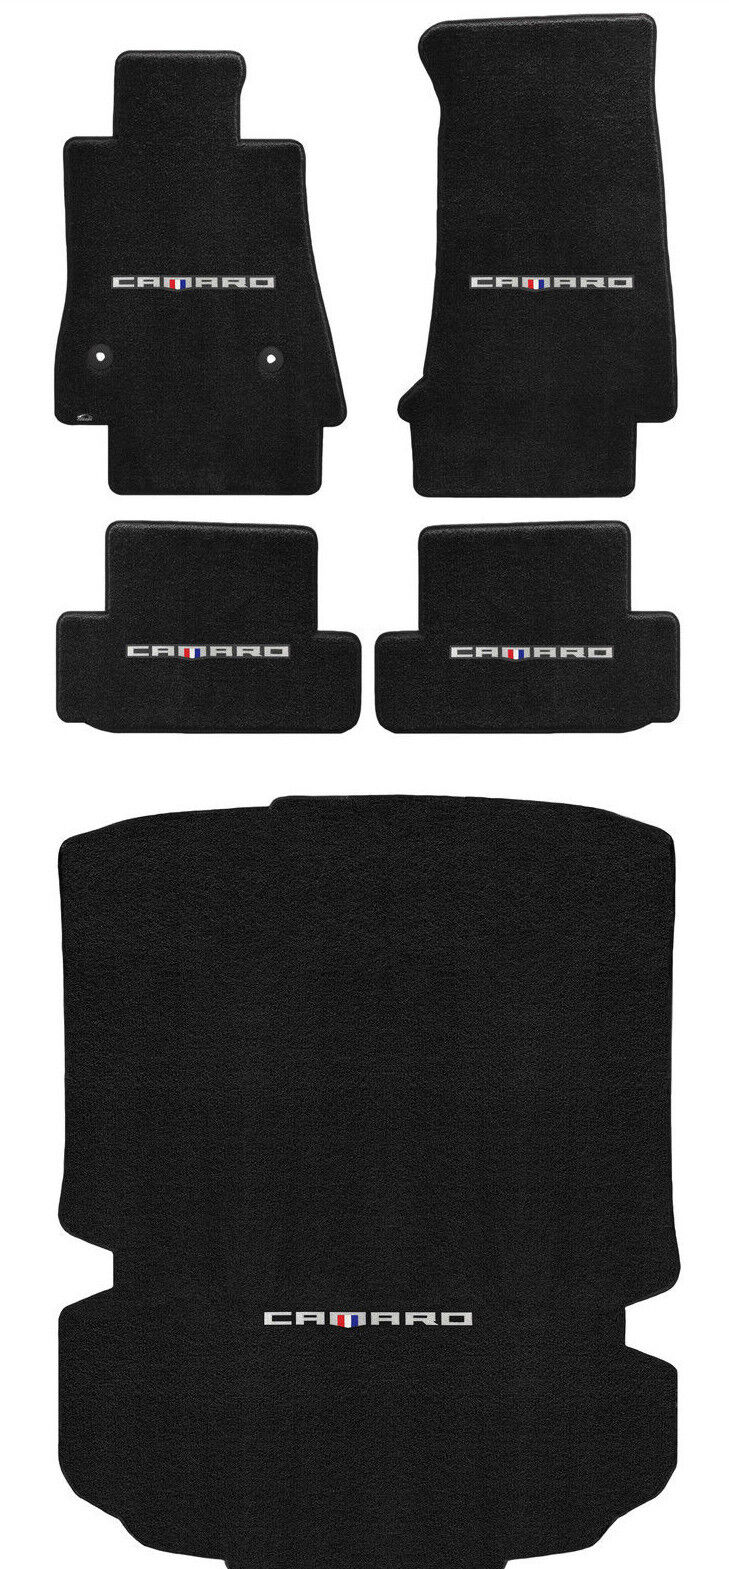 Lloyd ULTIMATS 5pc Floor Mat Set CUSTOM MADE TO FIT 2016 to 2020 Camaro Coupe